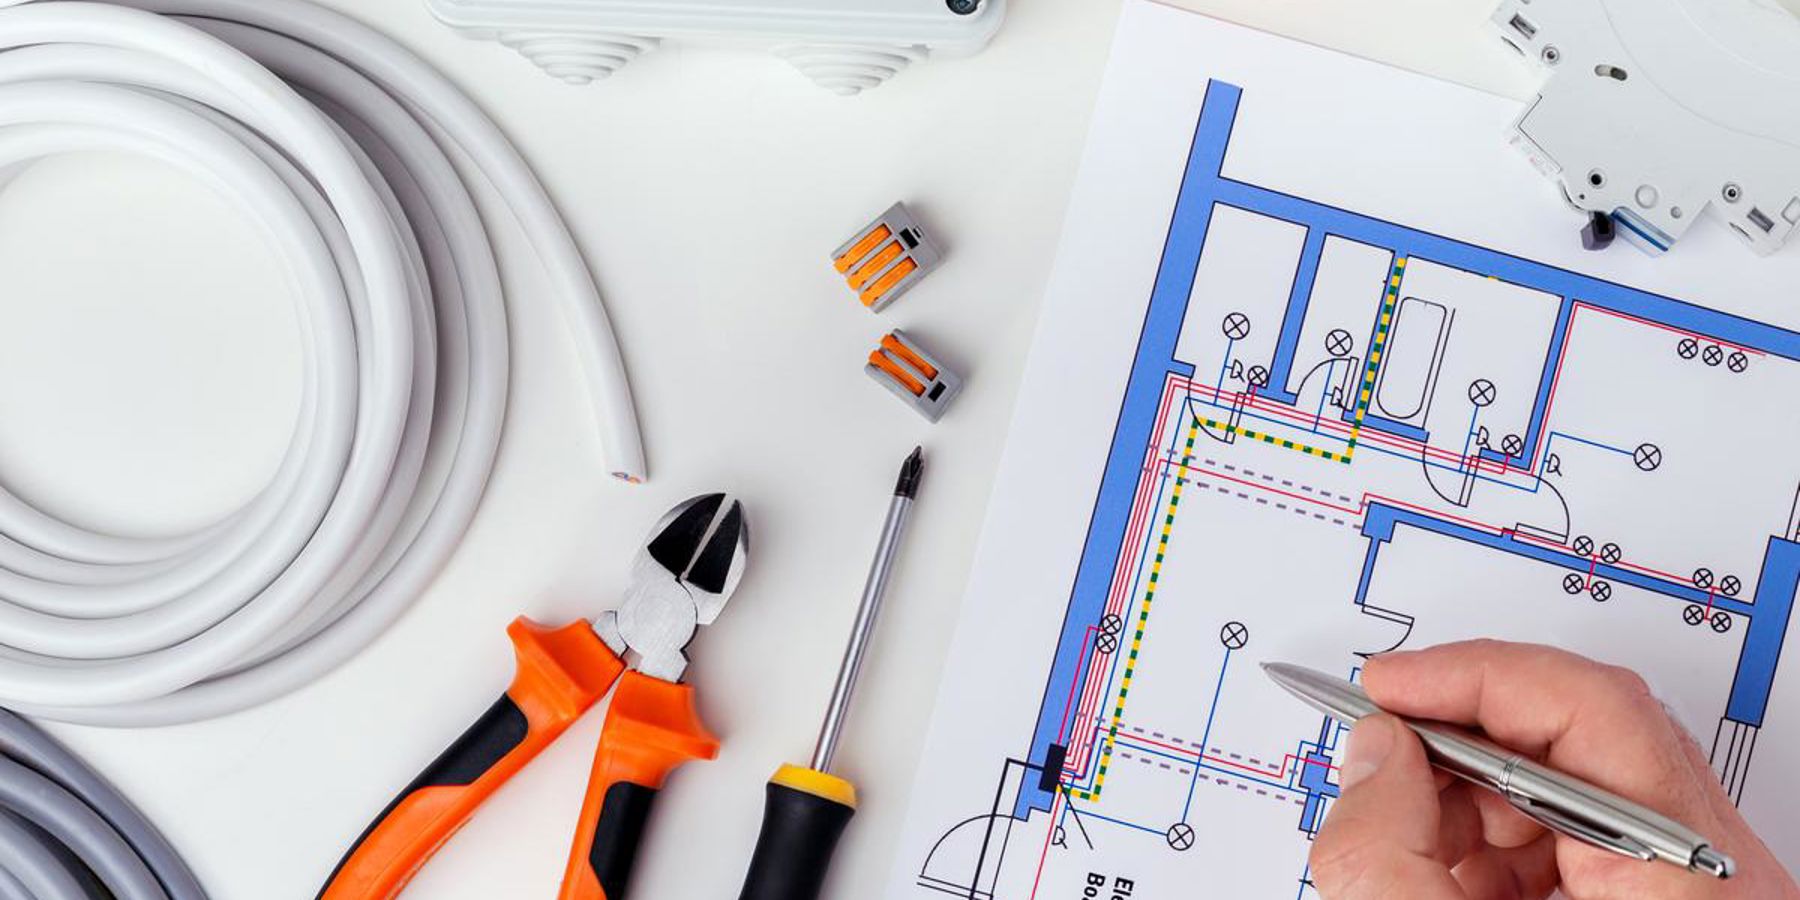 Hand holding pen over a building plan with electrical tools beside it.